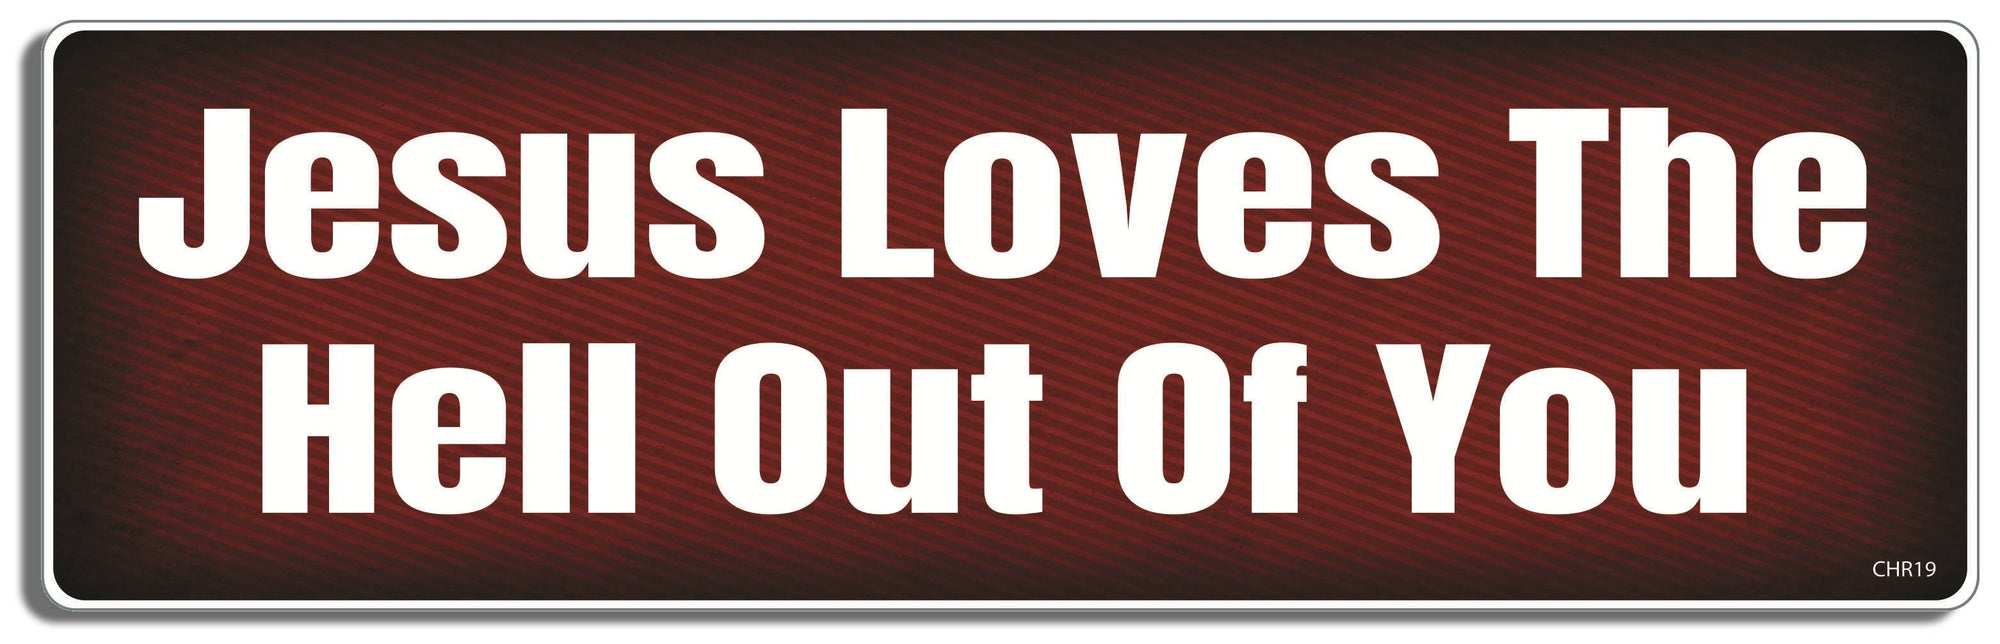 Jesus loved the Hell out of you - 3" x 10" Bumper Sticker--Car Magnet- -  Decal Bumper Sticker-Christian Bumper Sticker Car Magnet Jesus loved the Hell out of you-  Decal for carschristian, church, faith, jesus, pray, Religion